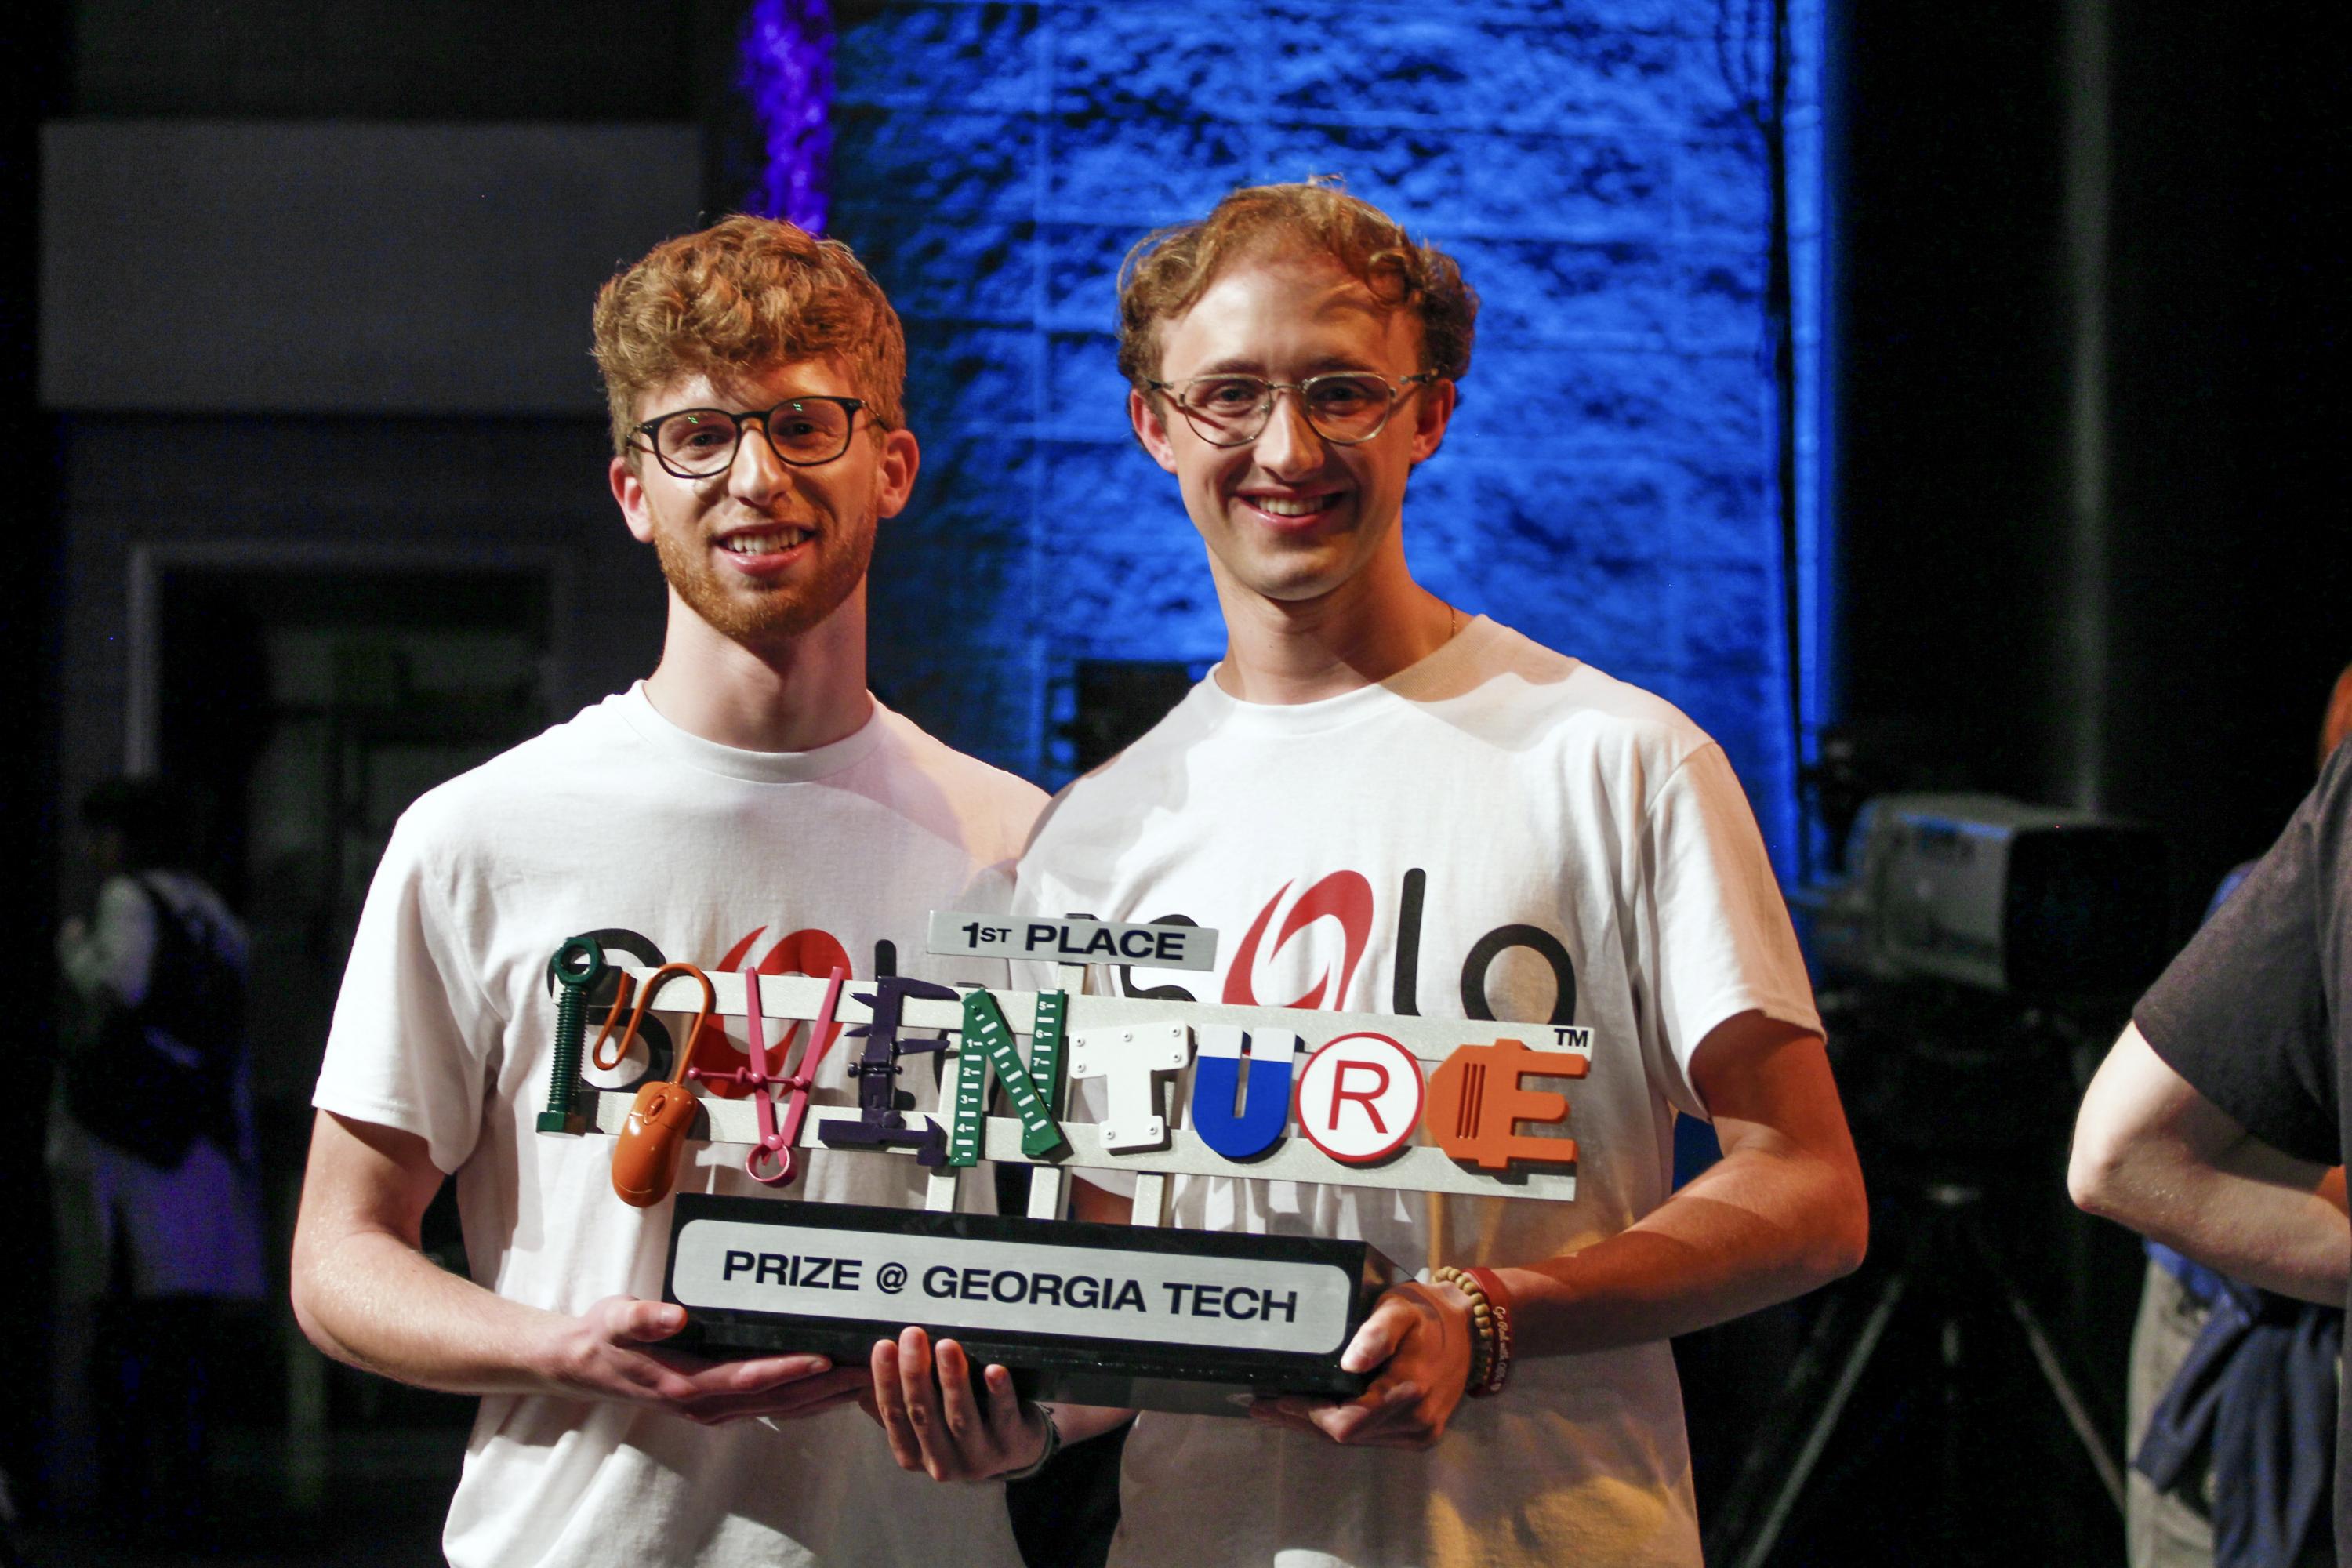 Team Sola, comprised of mechanical engineers Wessley Pergament of Old Westbury, NY, and Brayden Drury of Park City, Utah, won the 2022 Georgia Tech InVenture Prize.